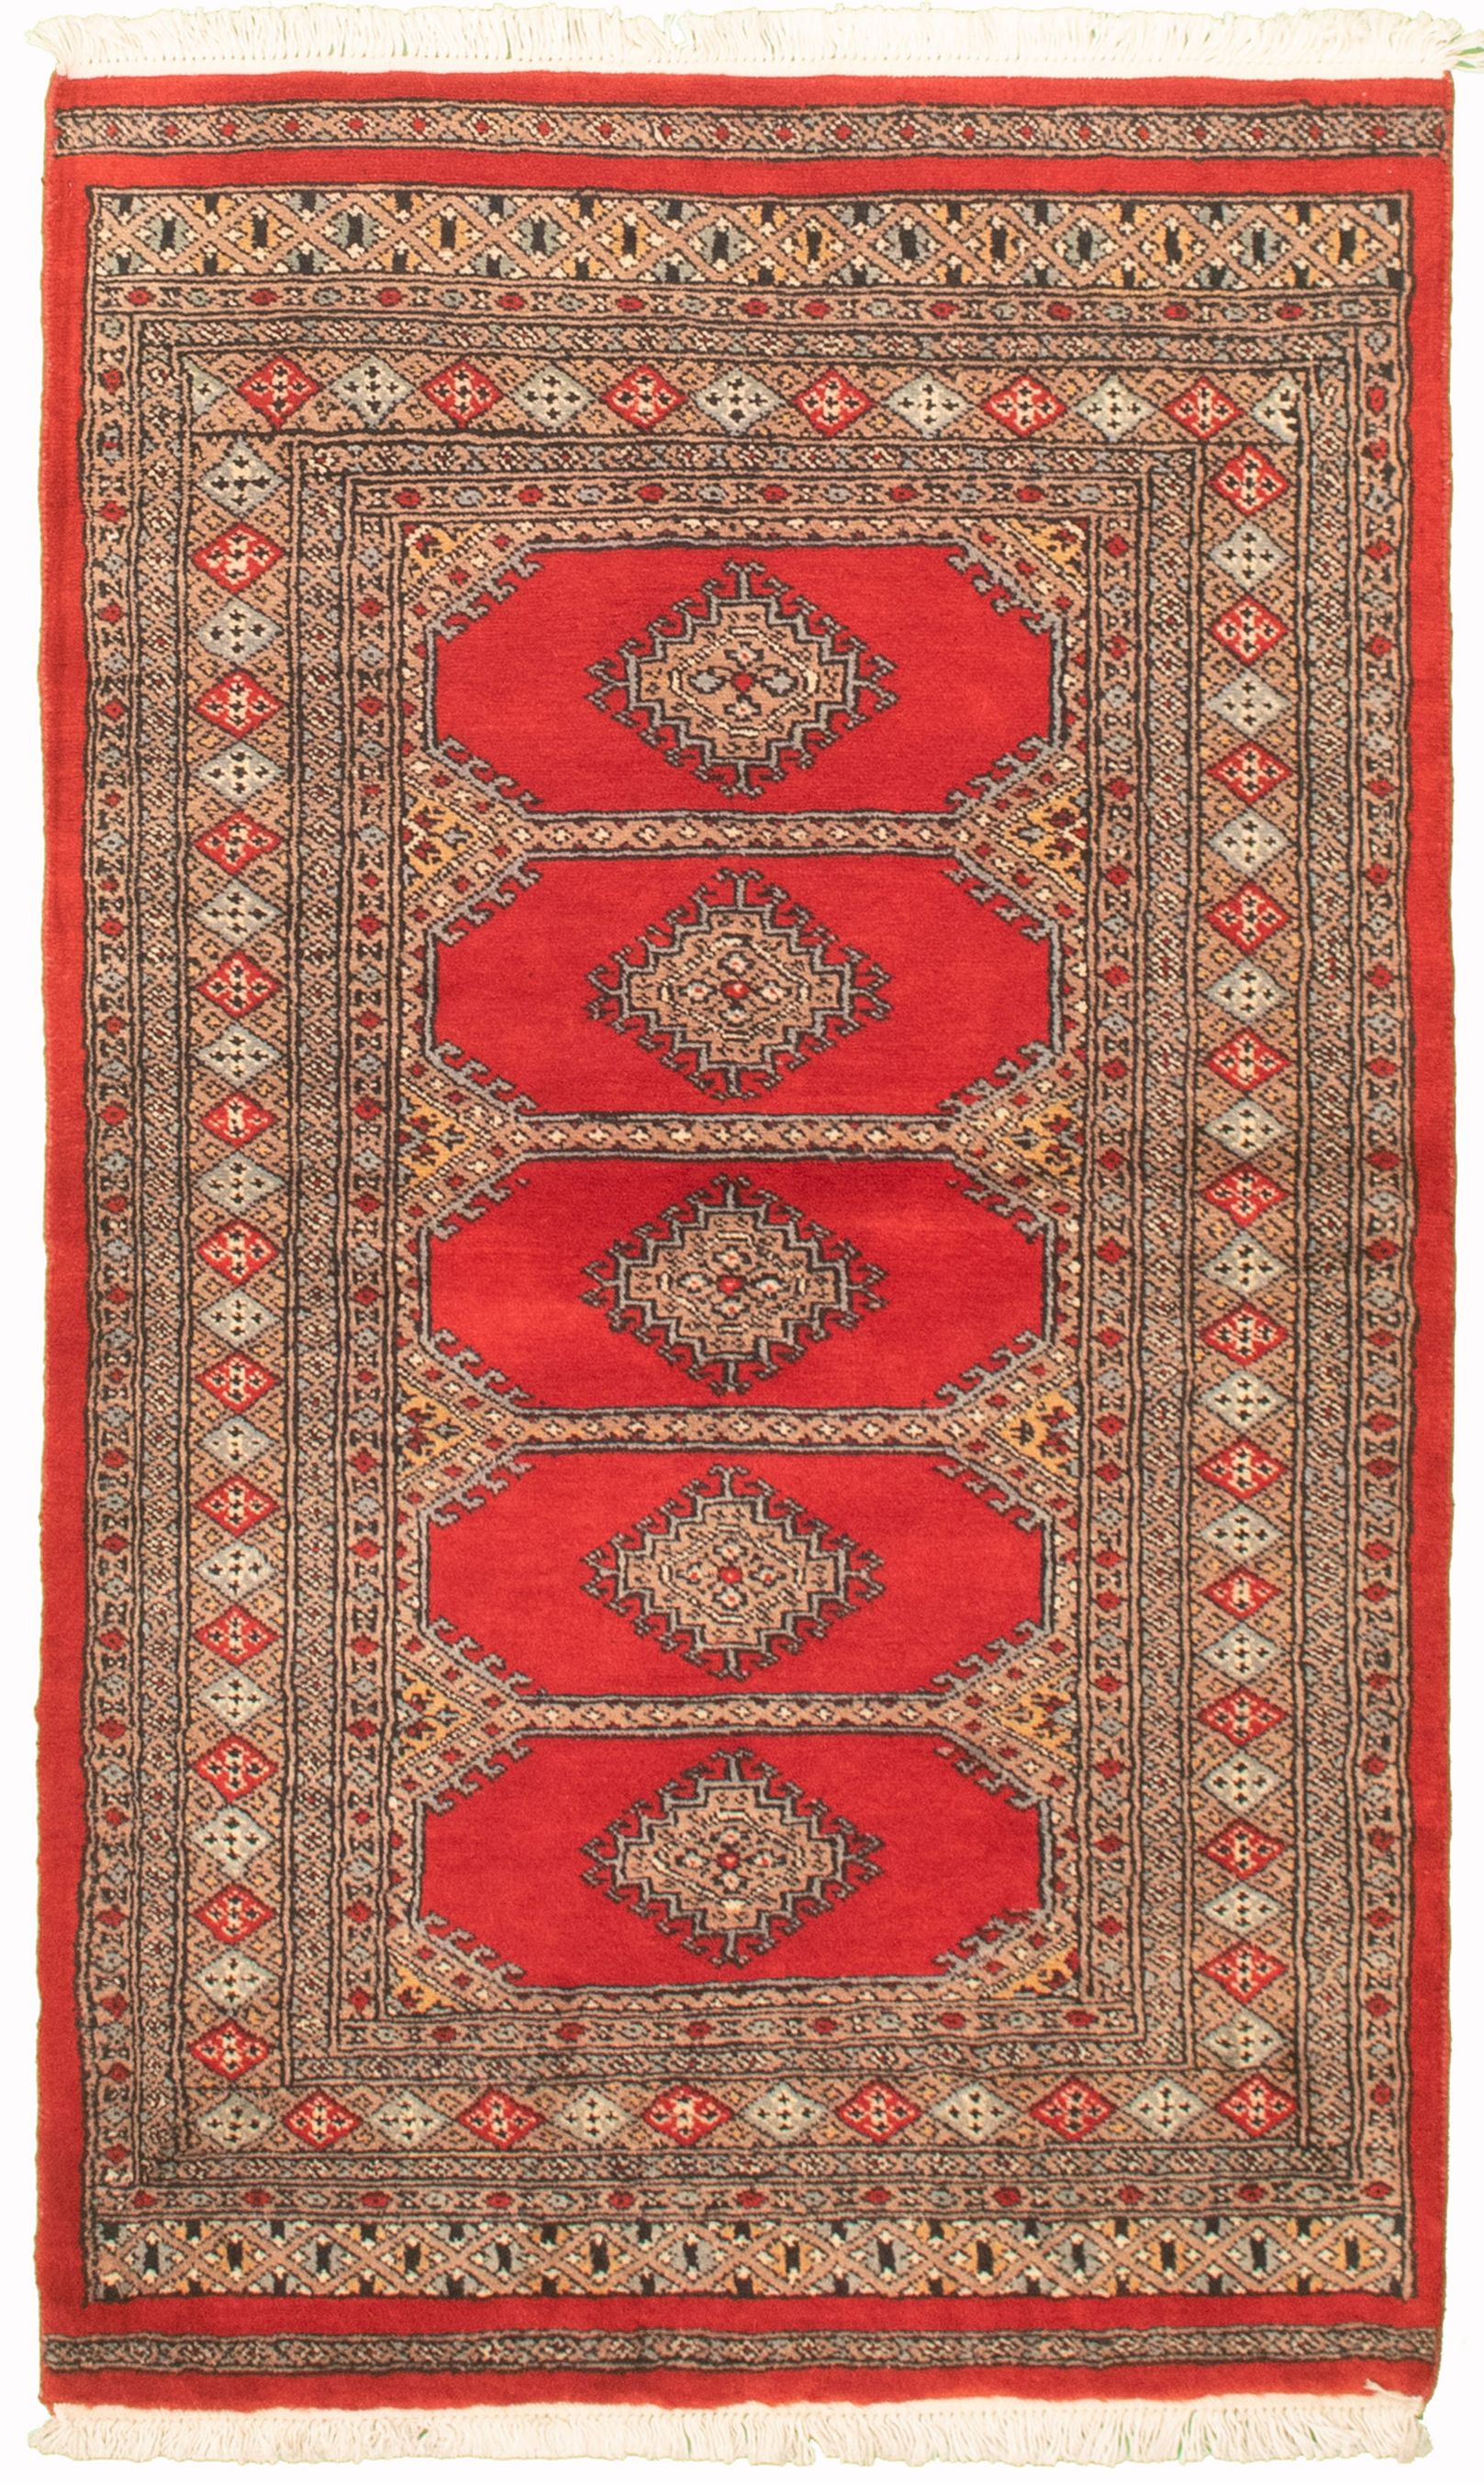 Hand-knotted Finest Peshawar Bokhara Red Wool Rug 3'1" x 5'5"  Size: 3'1" x 5'5"  